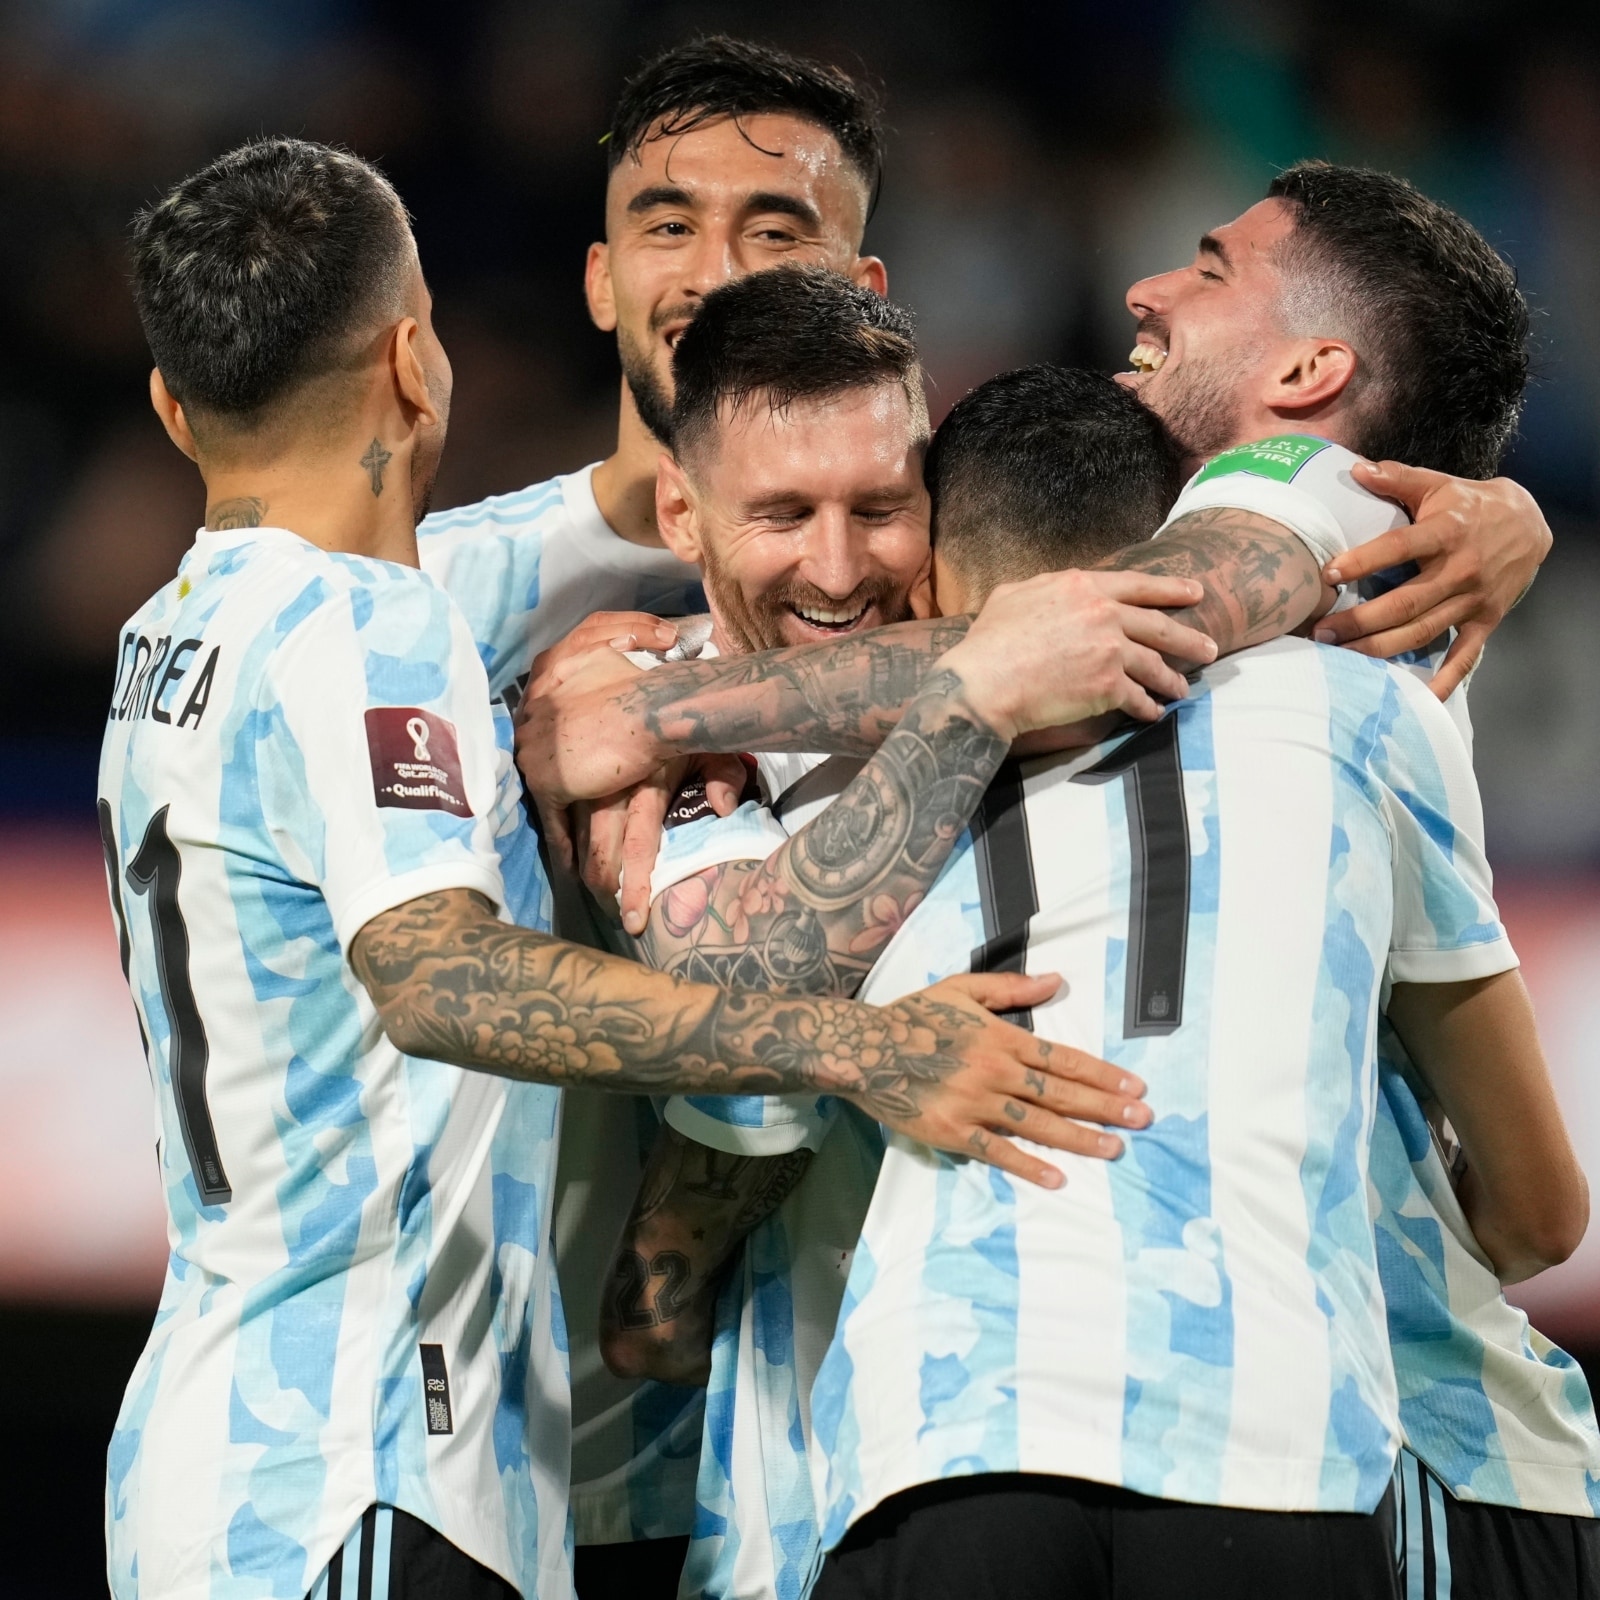 CONMEBOL- UEFA Cup of Champions 2022 Finalissima Match Between Italy and Argentina